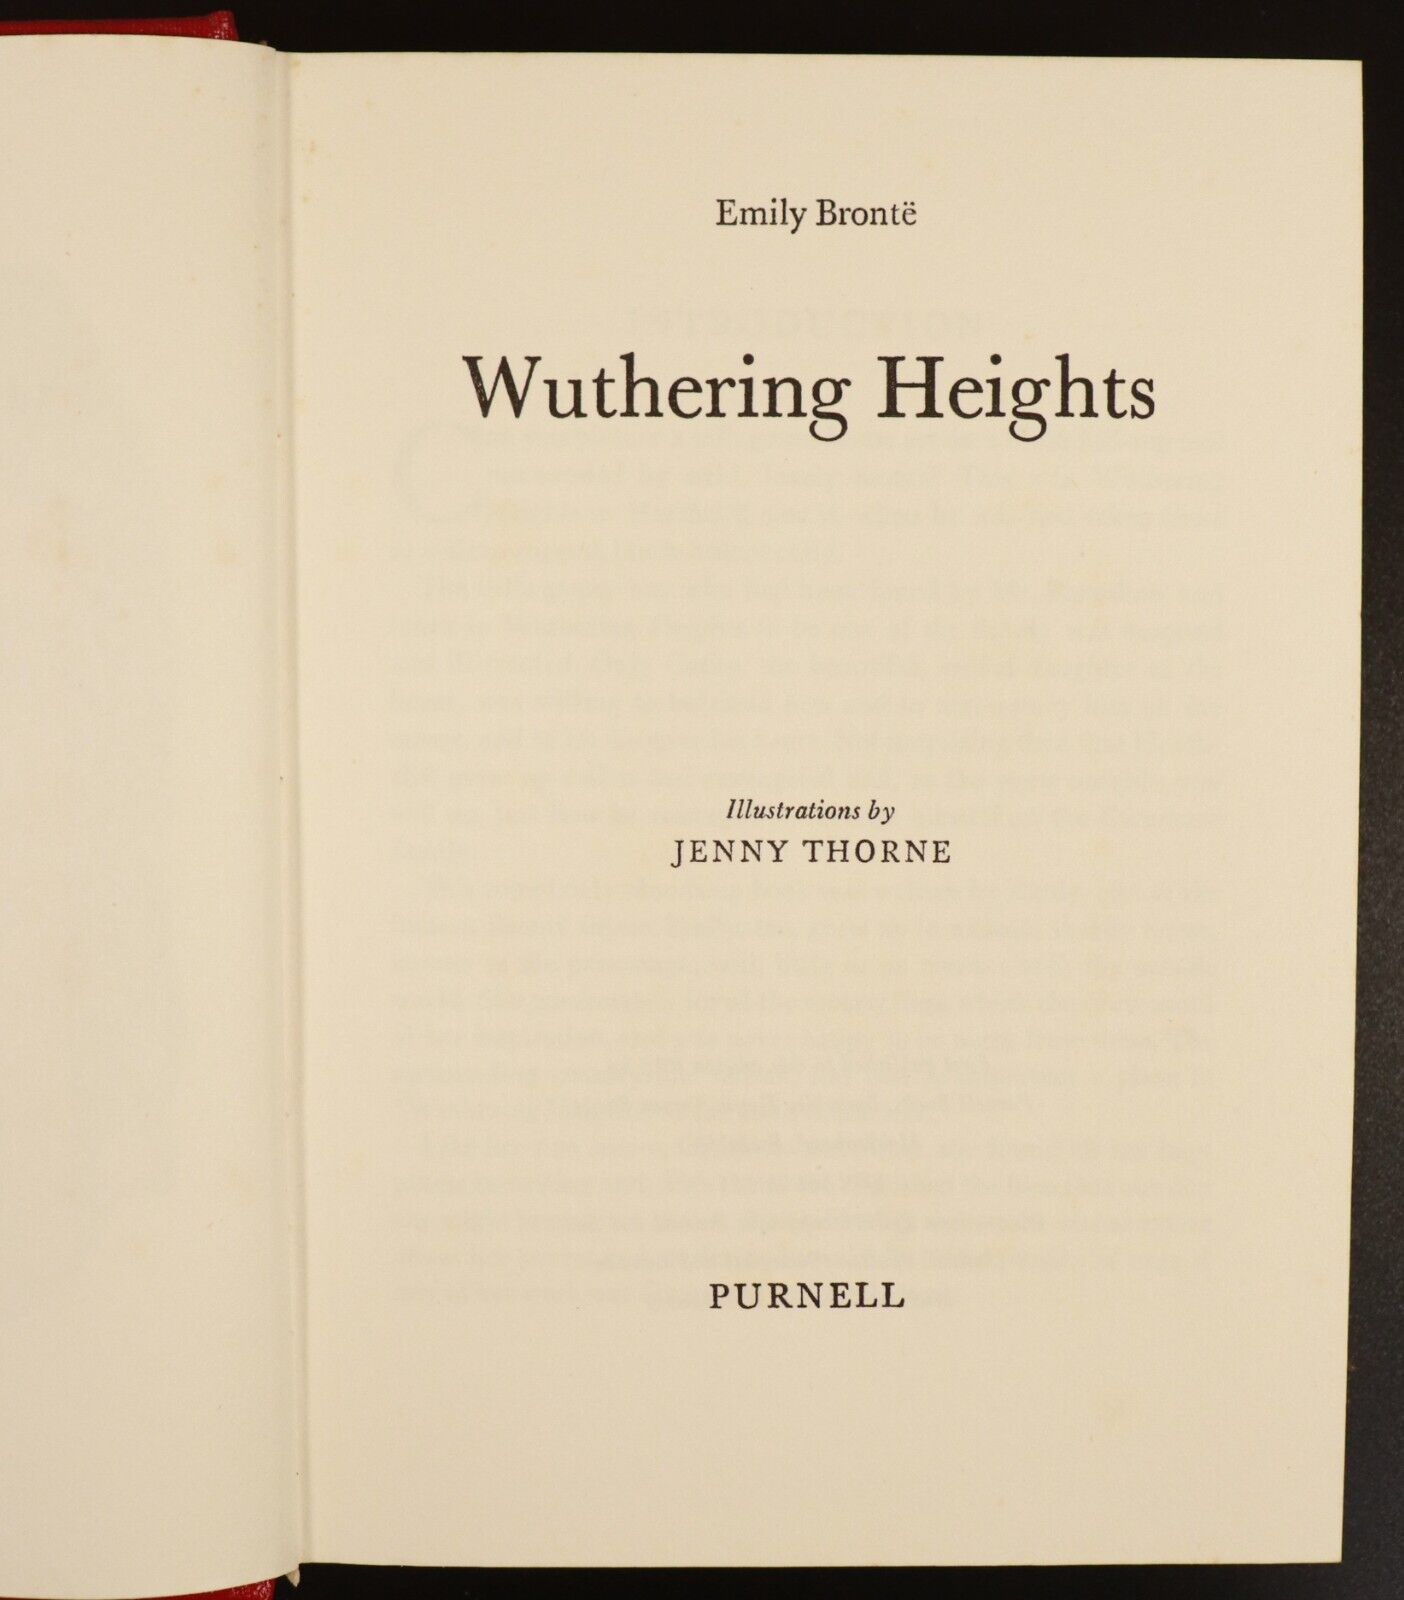 1975 Wuthering Heights by Emily Bronte Classic Illustrated Literature Book - 0